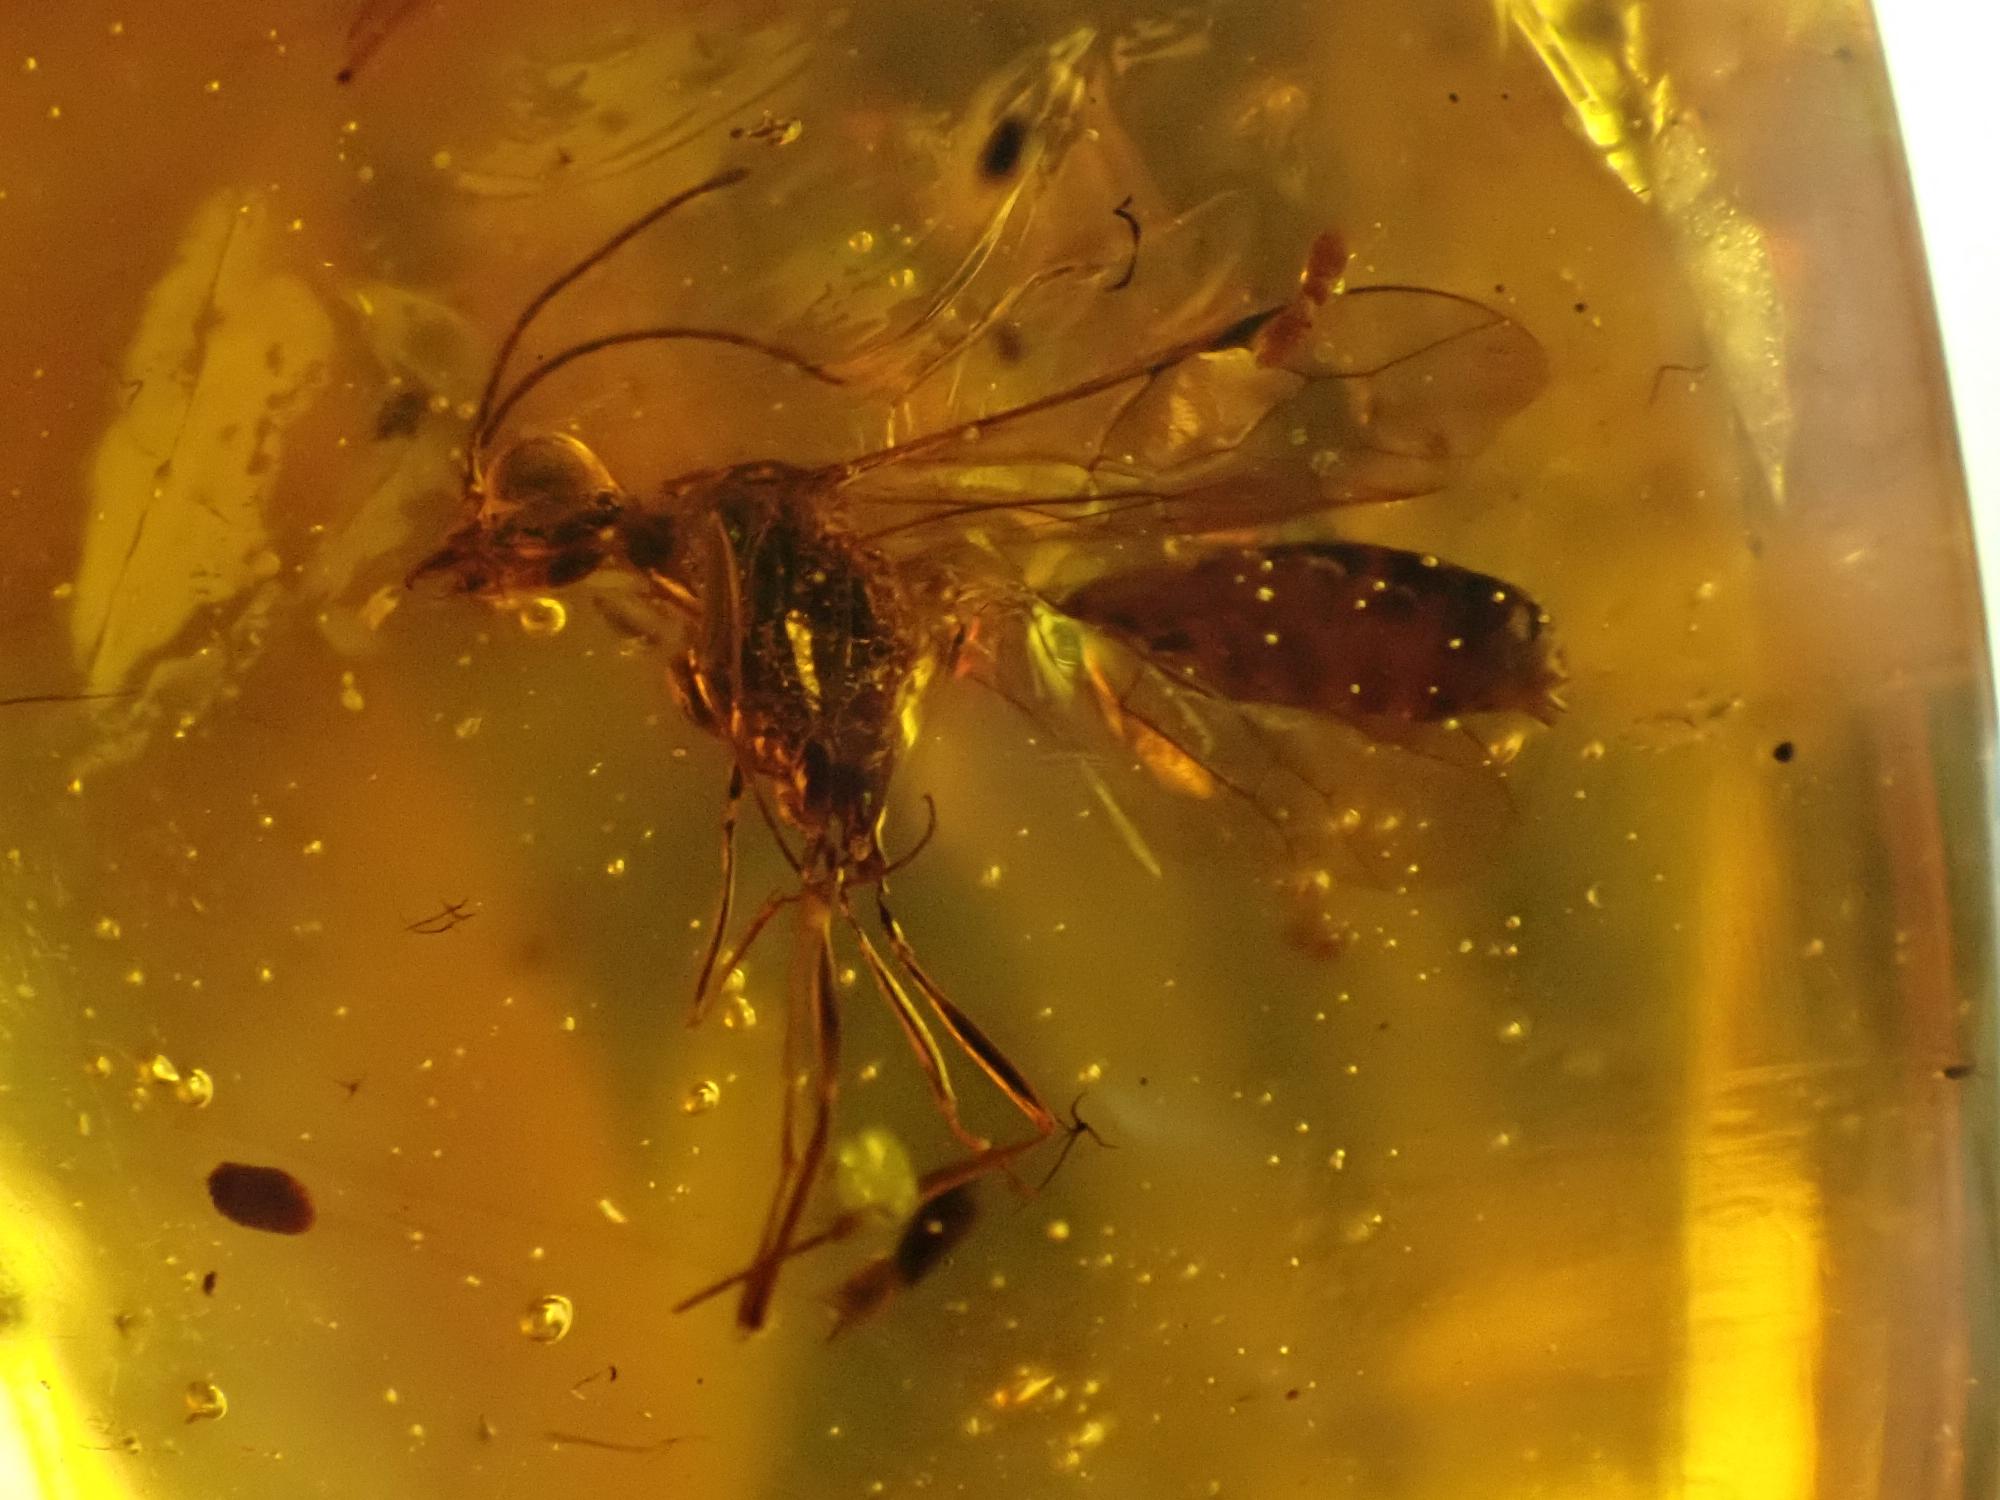 Natural History: An amber specimen containing the remains of a fly and other insects